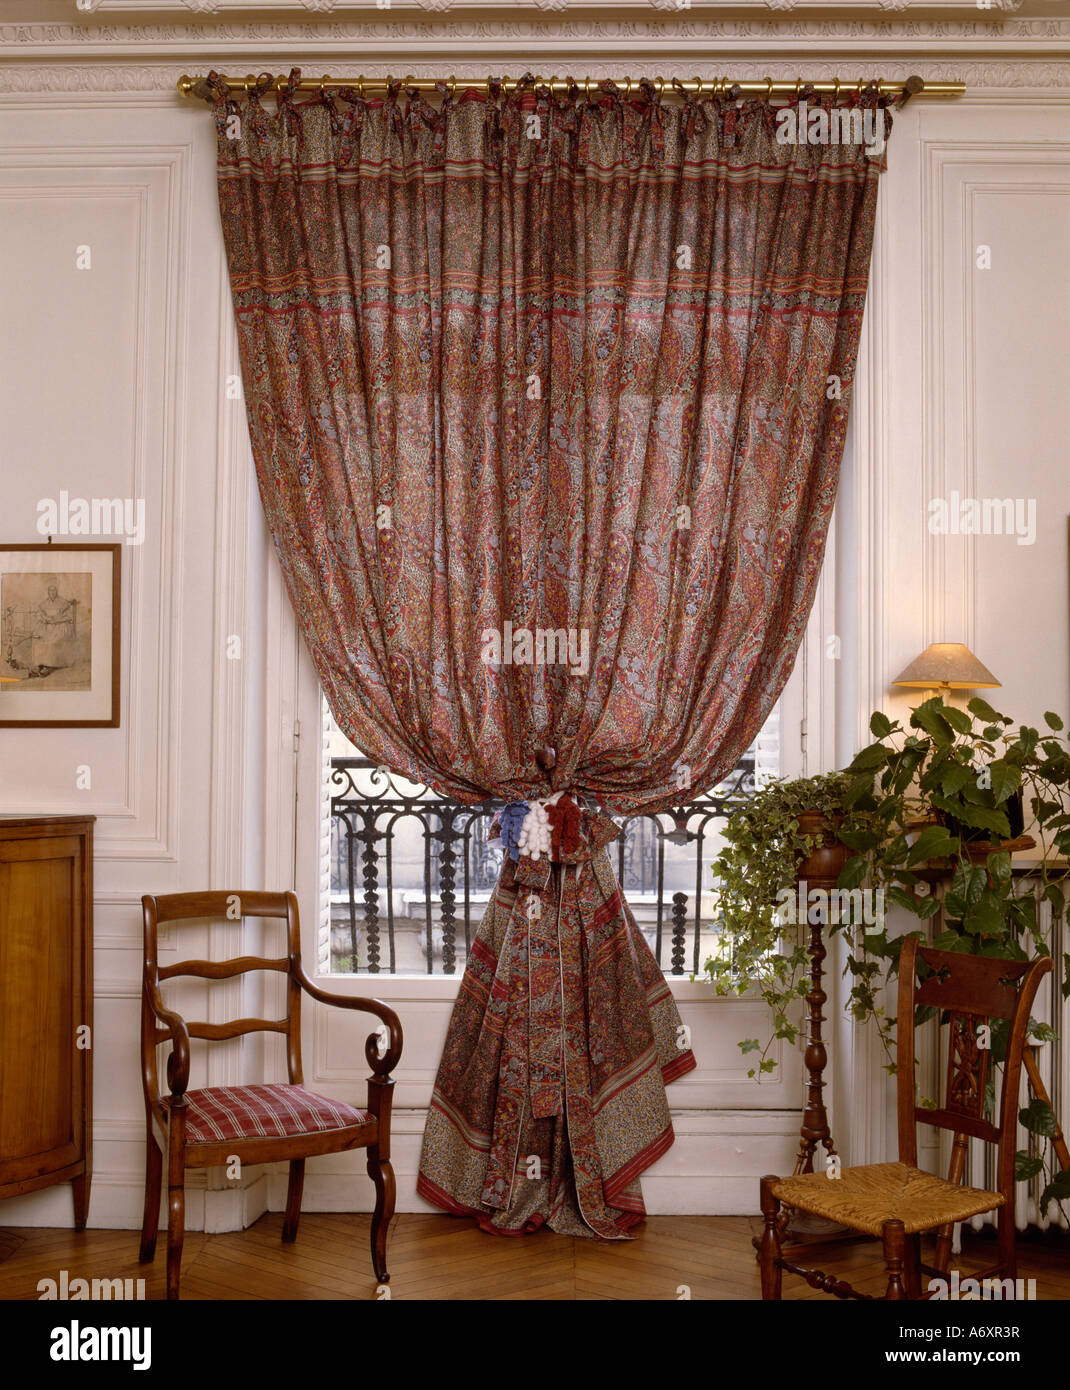 Wooden chair beside Paisley print drapes at window Stock Photo